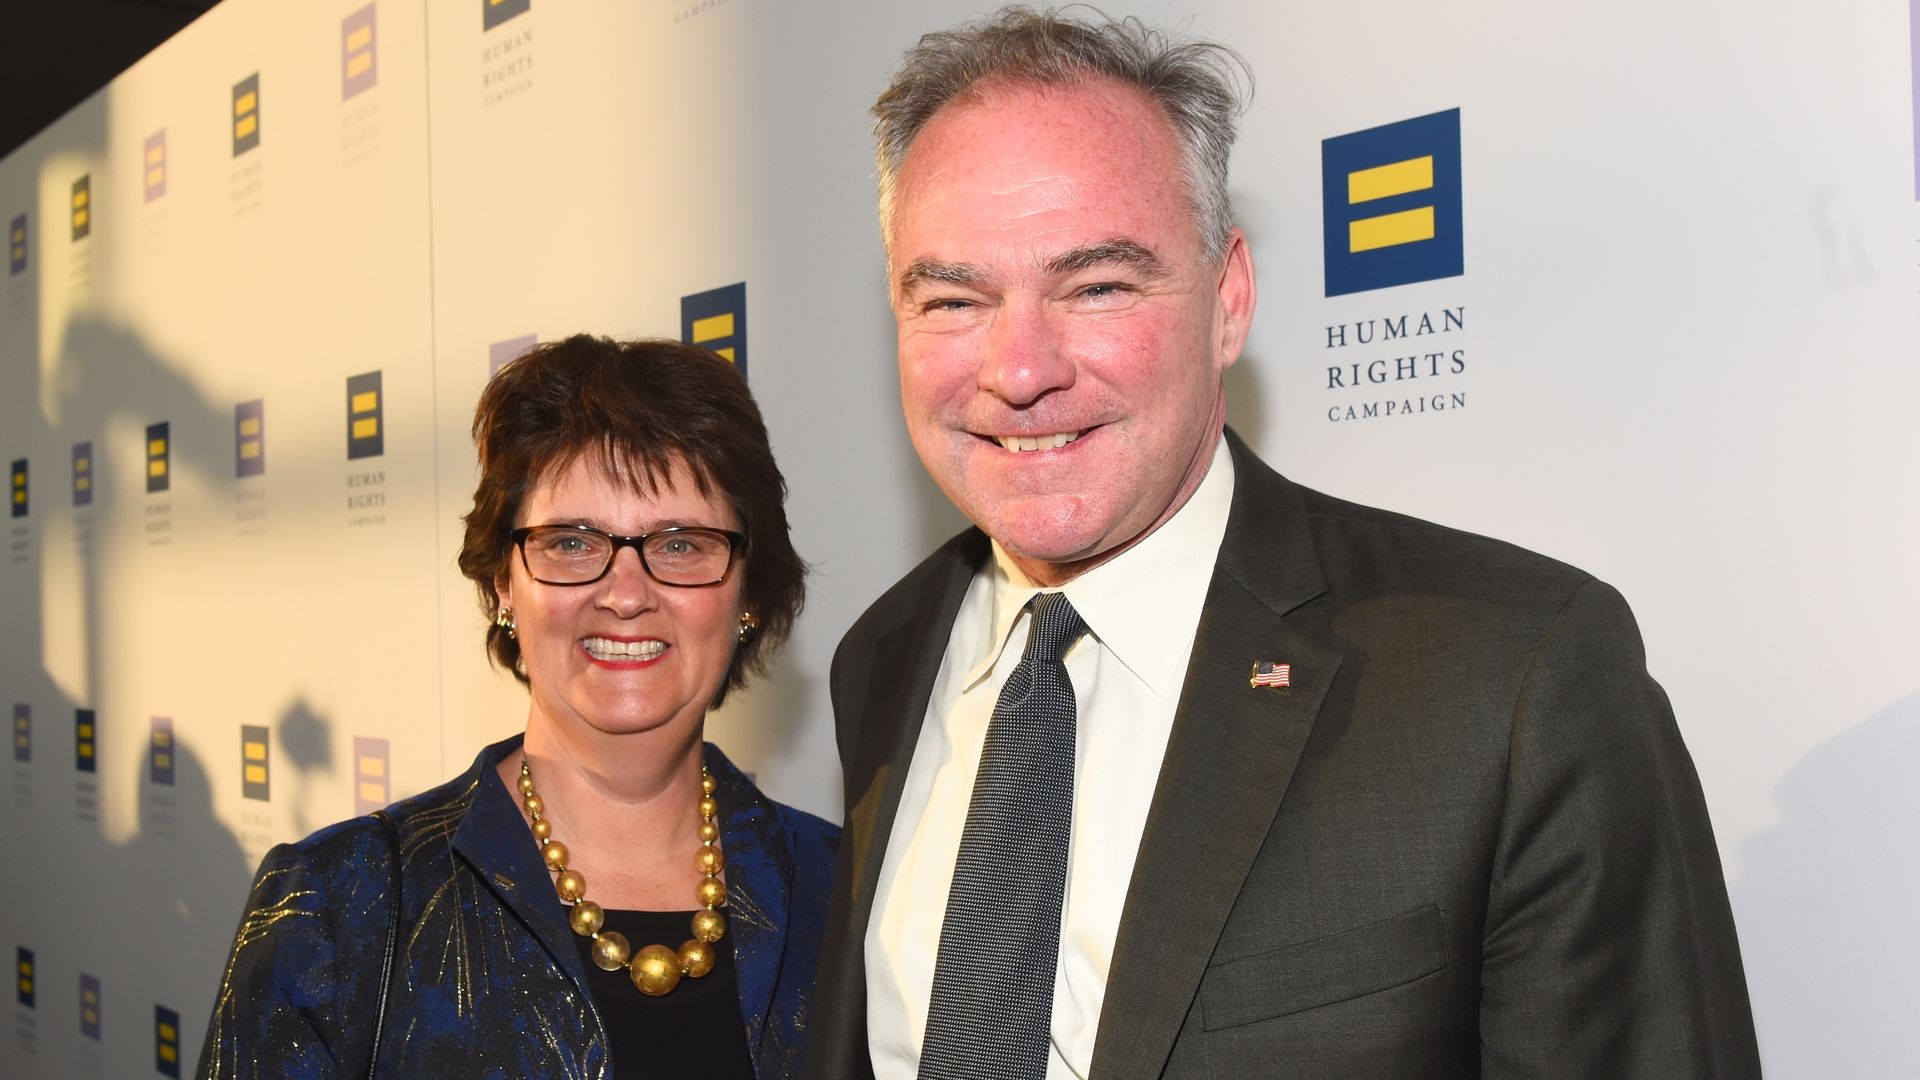 Sen. Tim Kaine and his wife Anne Holton at The Human Rights Campaign gala dinner